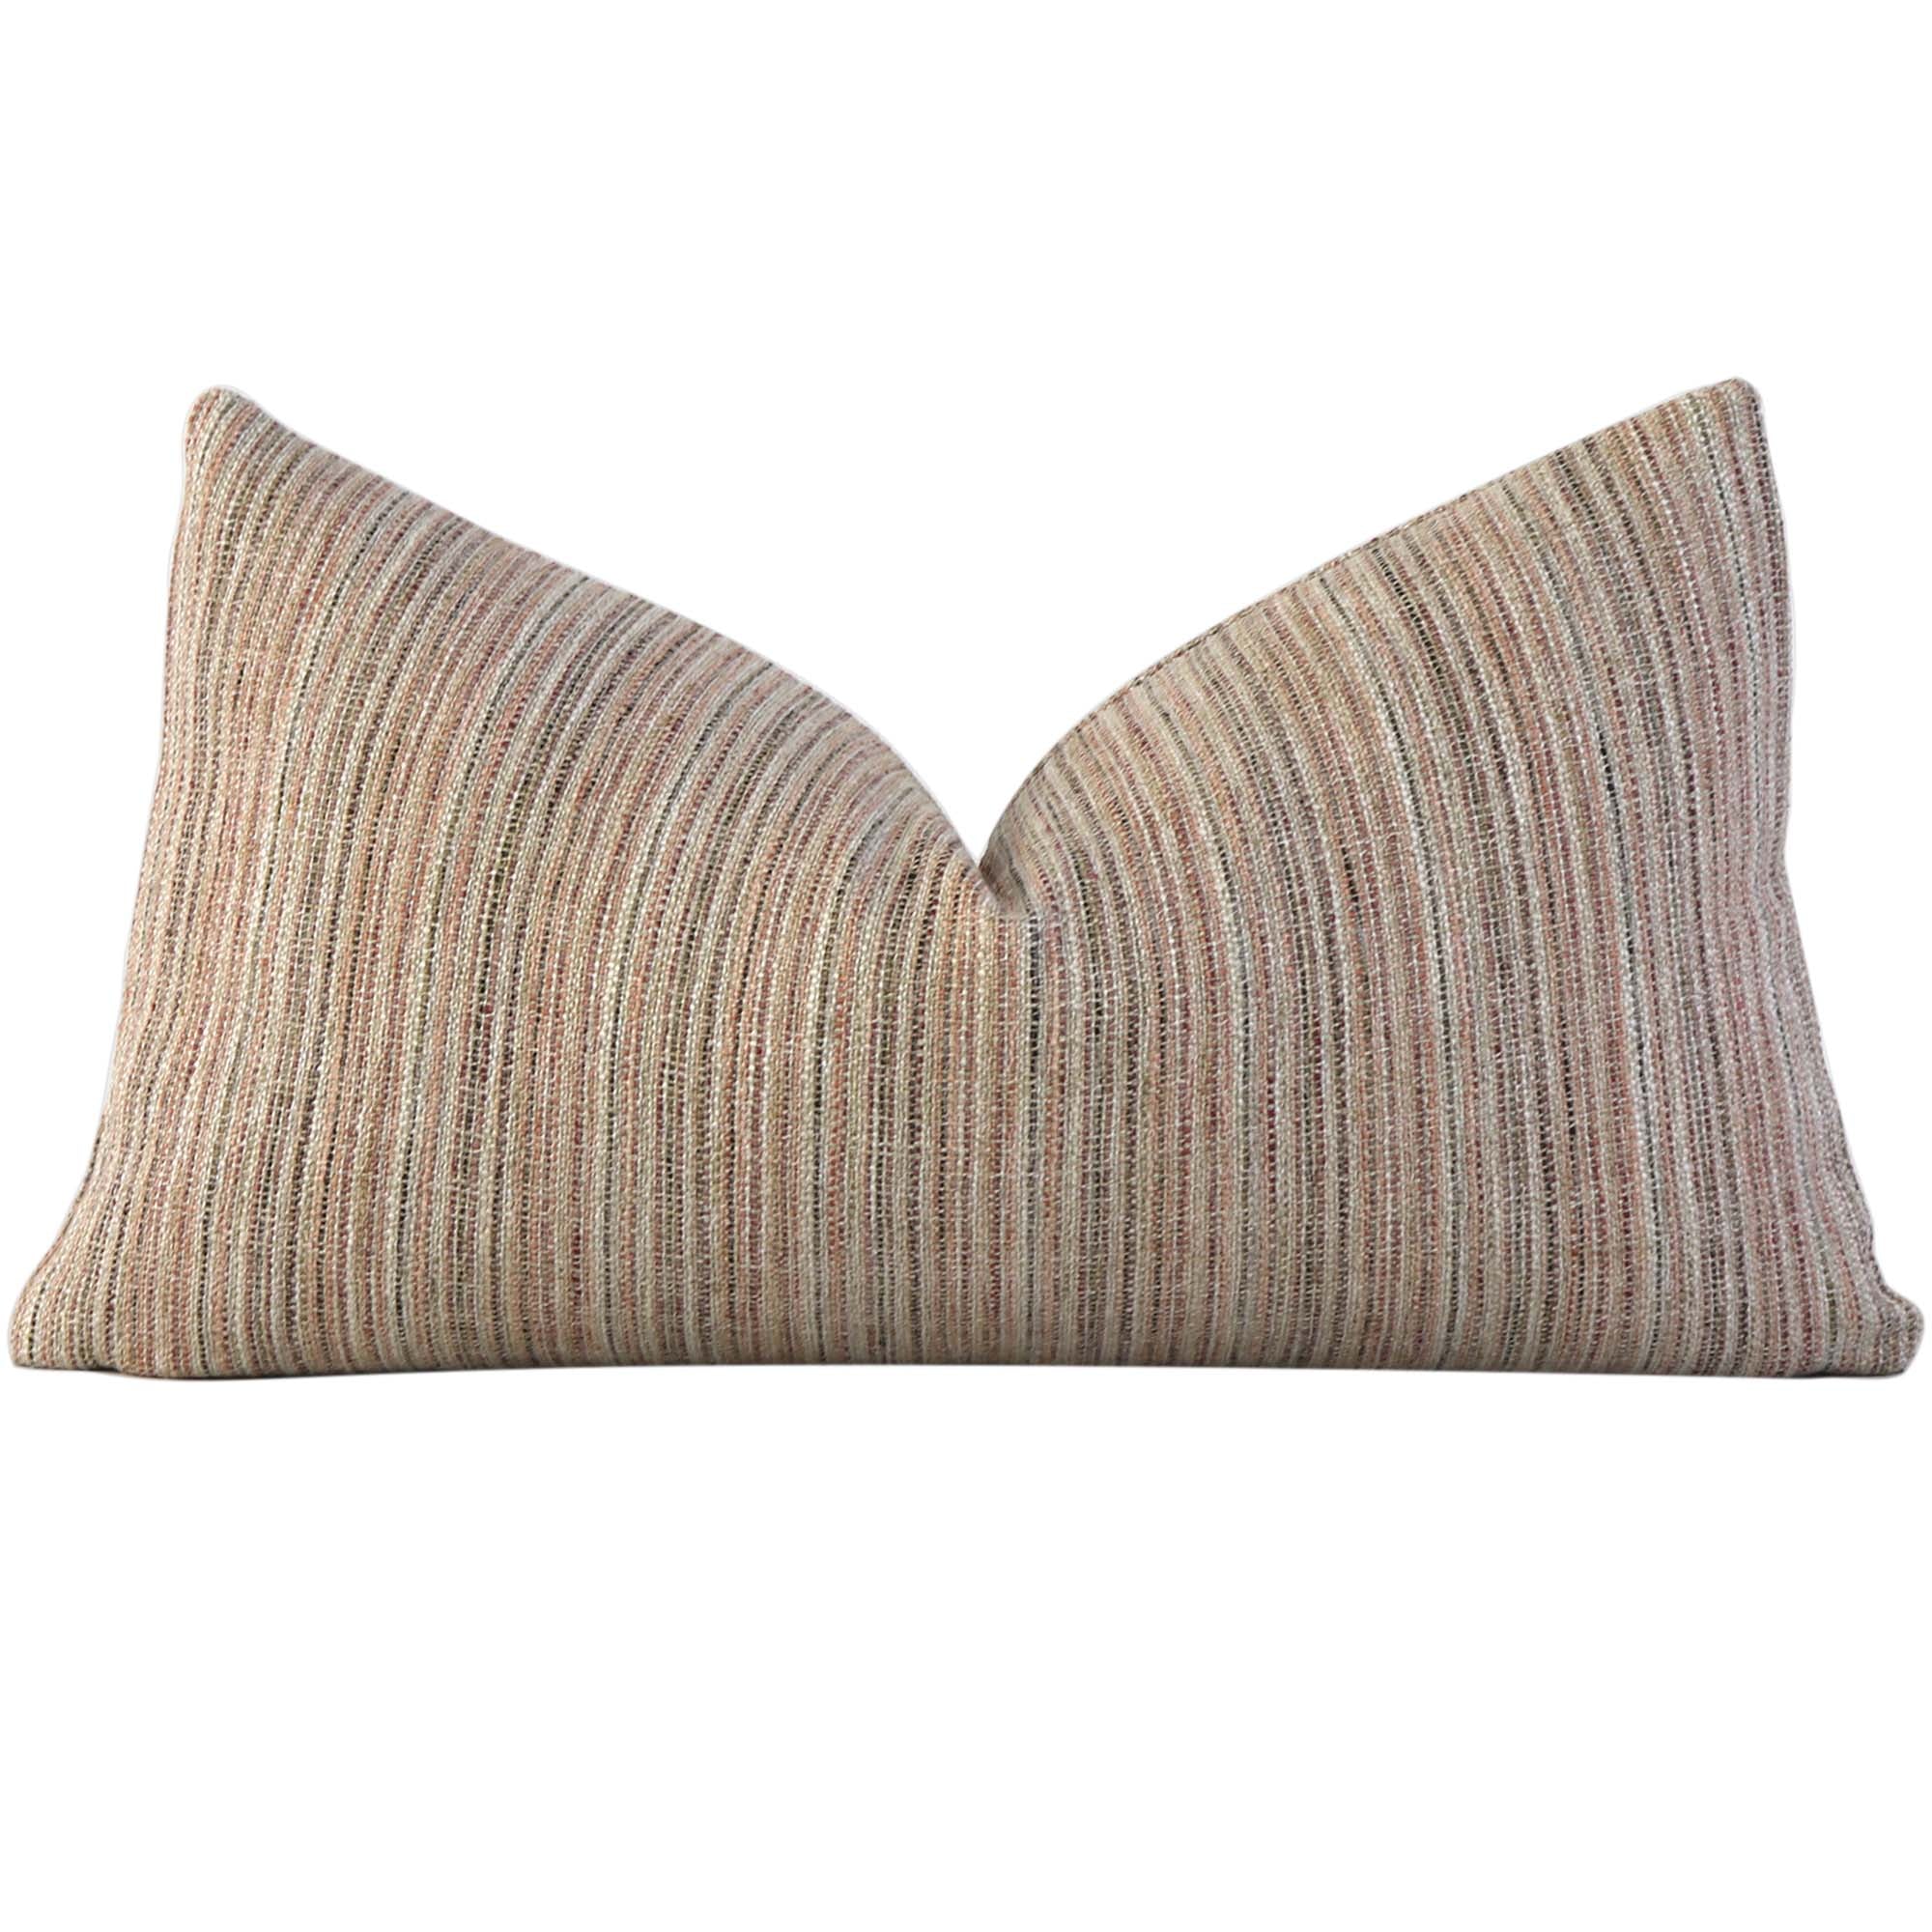 Textured Multi Stripe Throw Pillow or Pillow Cover - Bed Bath & Beyond -  18227166